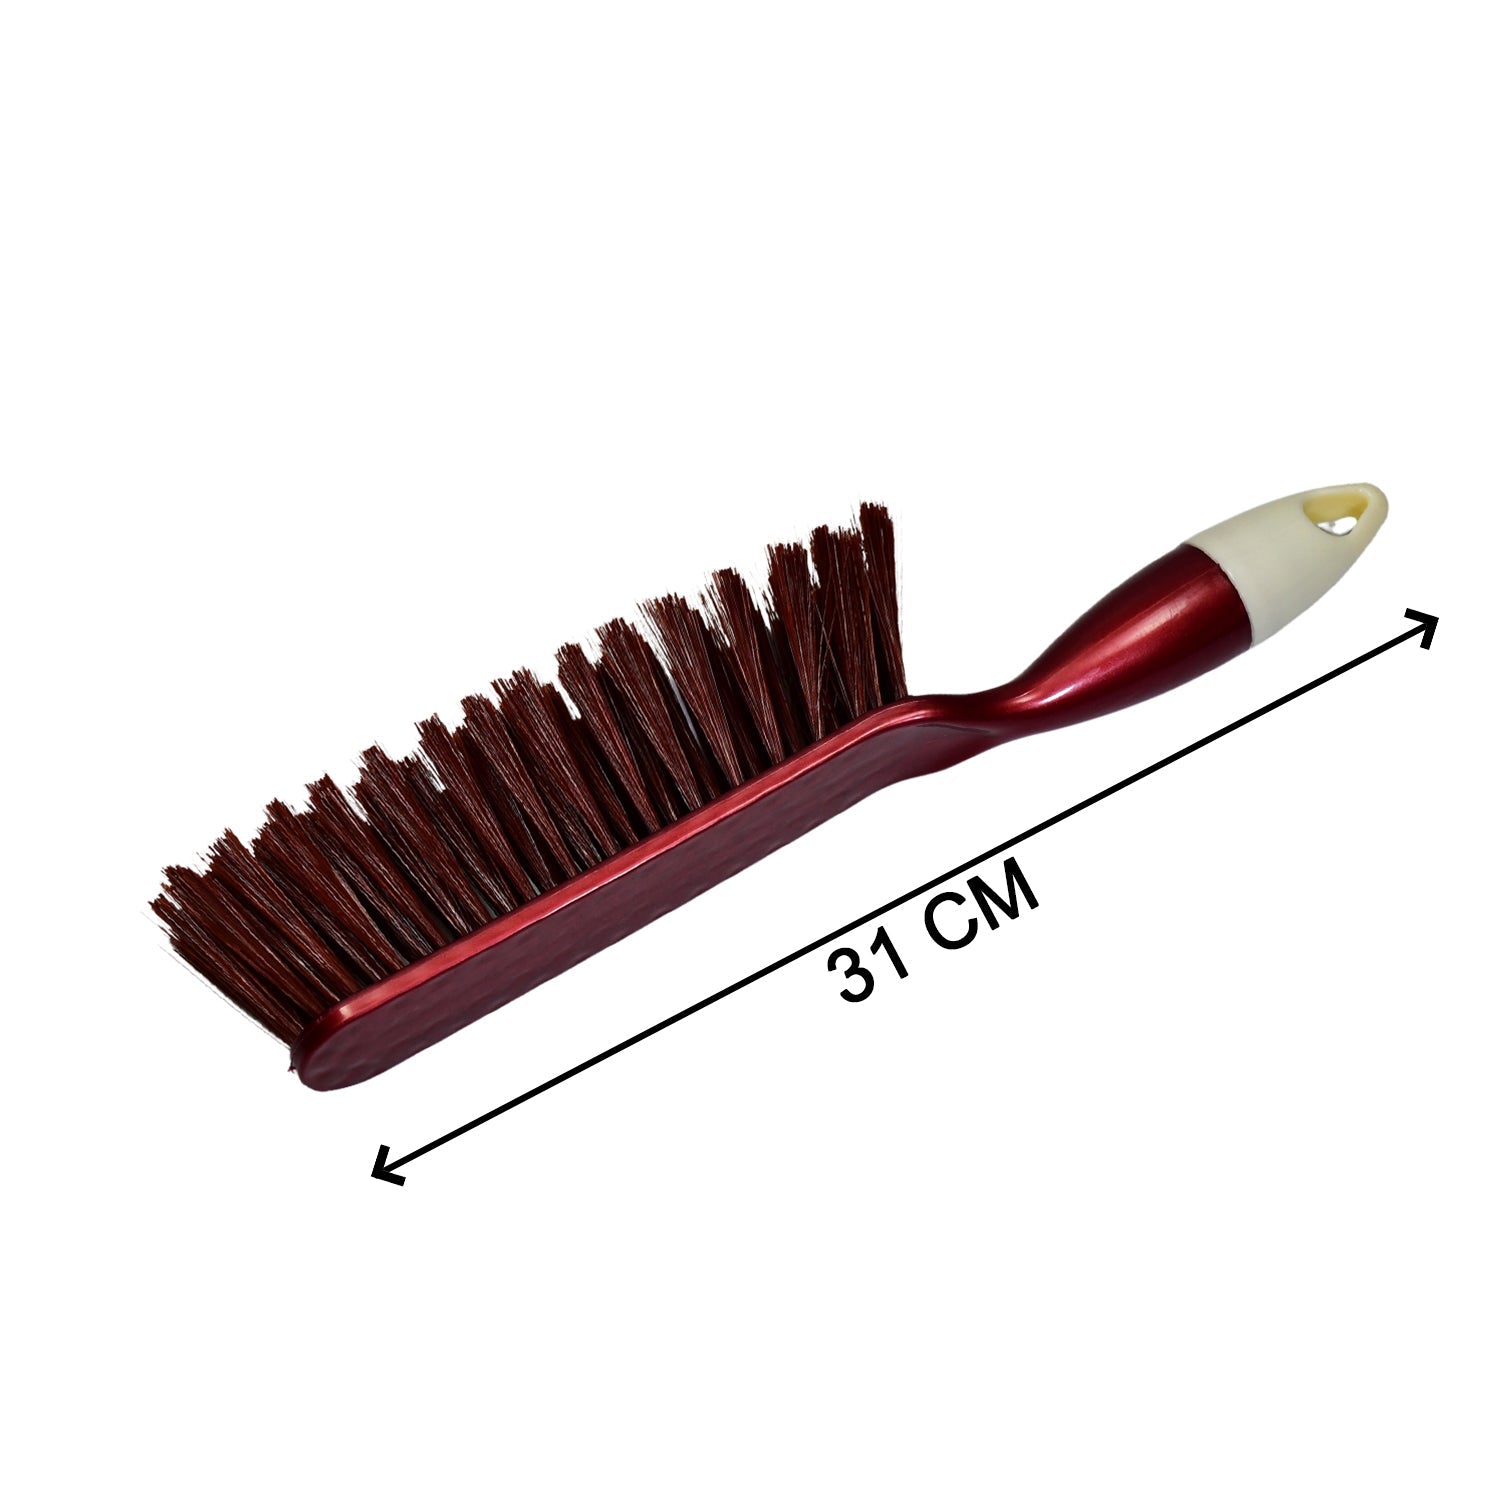 4864 Cleaning Duster Brush for Car Seats, Carpet, Mats, Multi-Purpose Use 